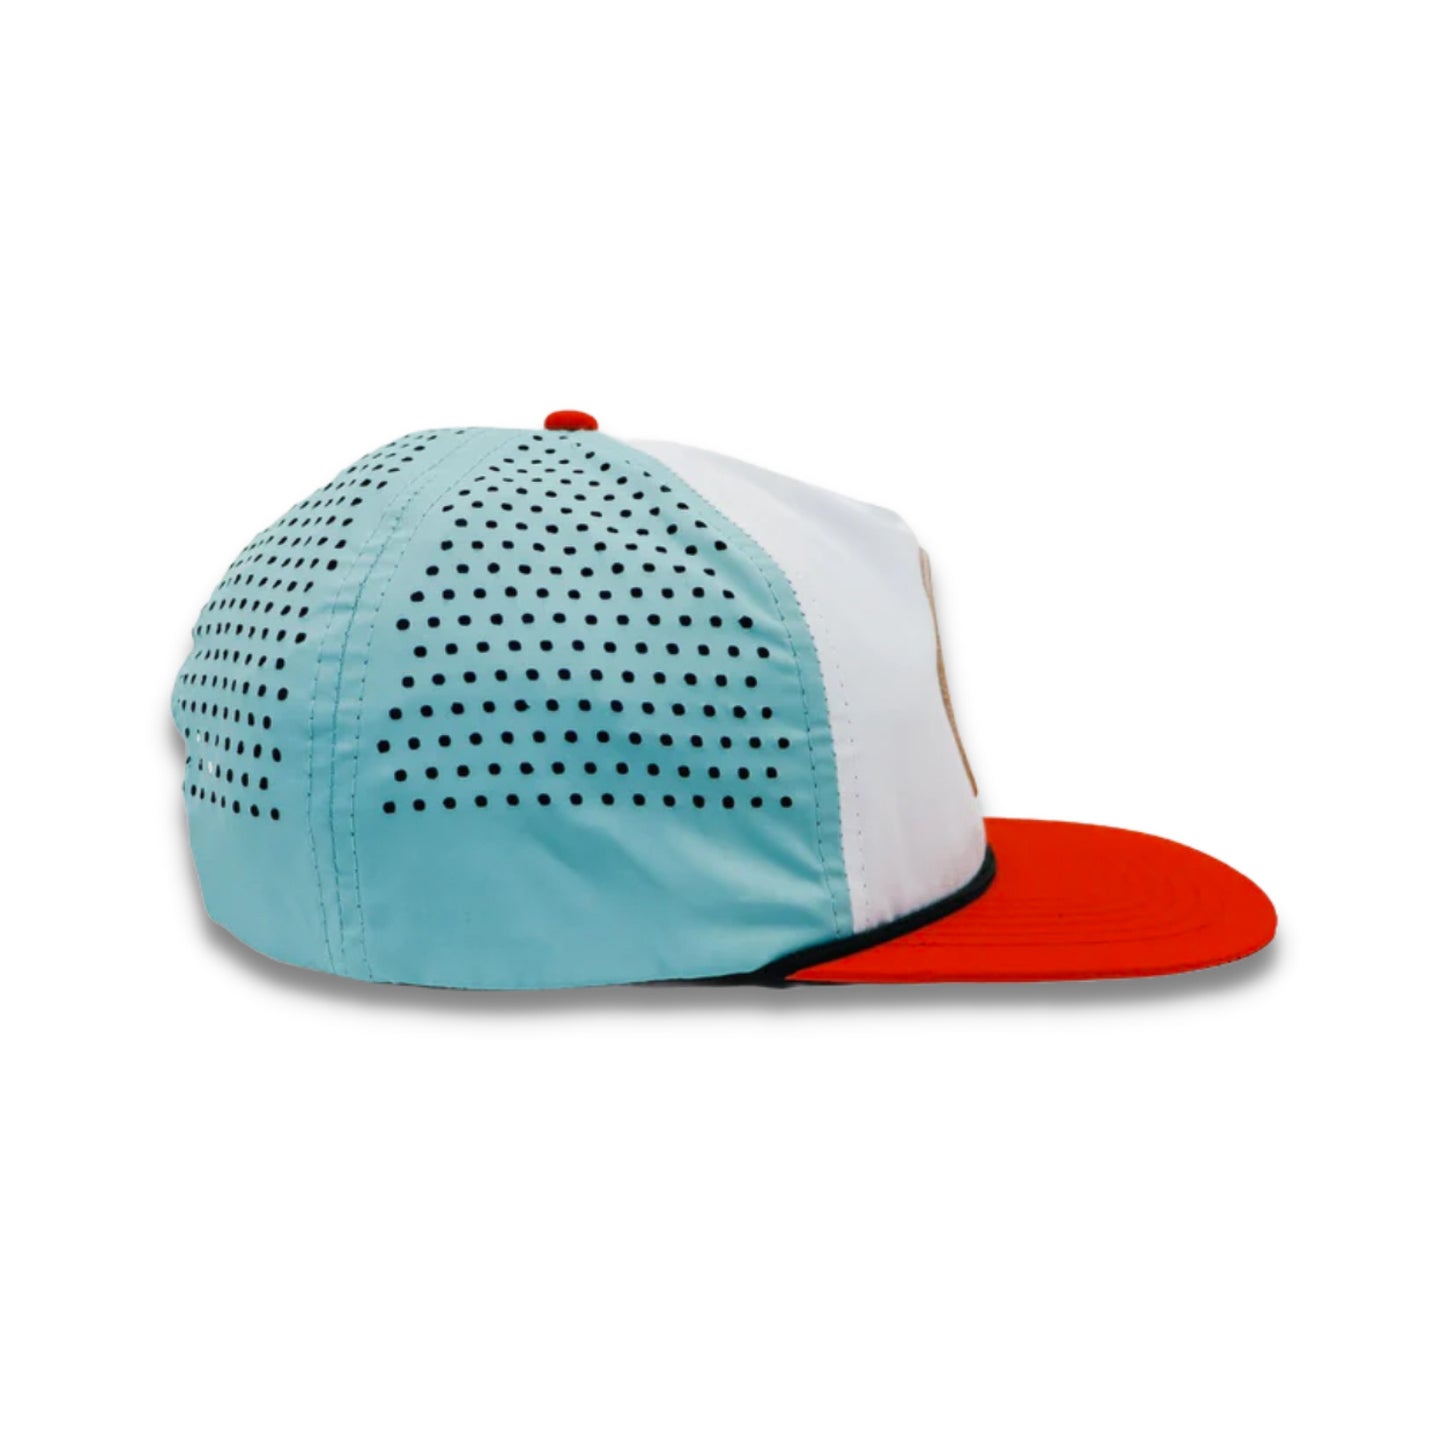 Last Cast Snapback - Baby Blue & Candy Red